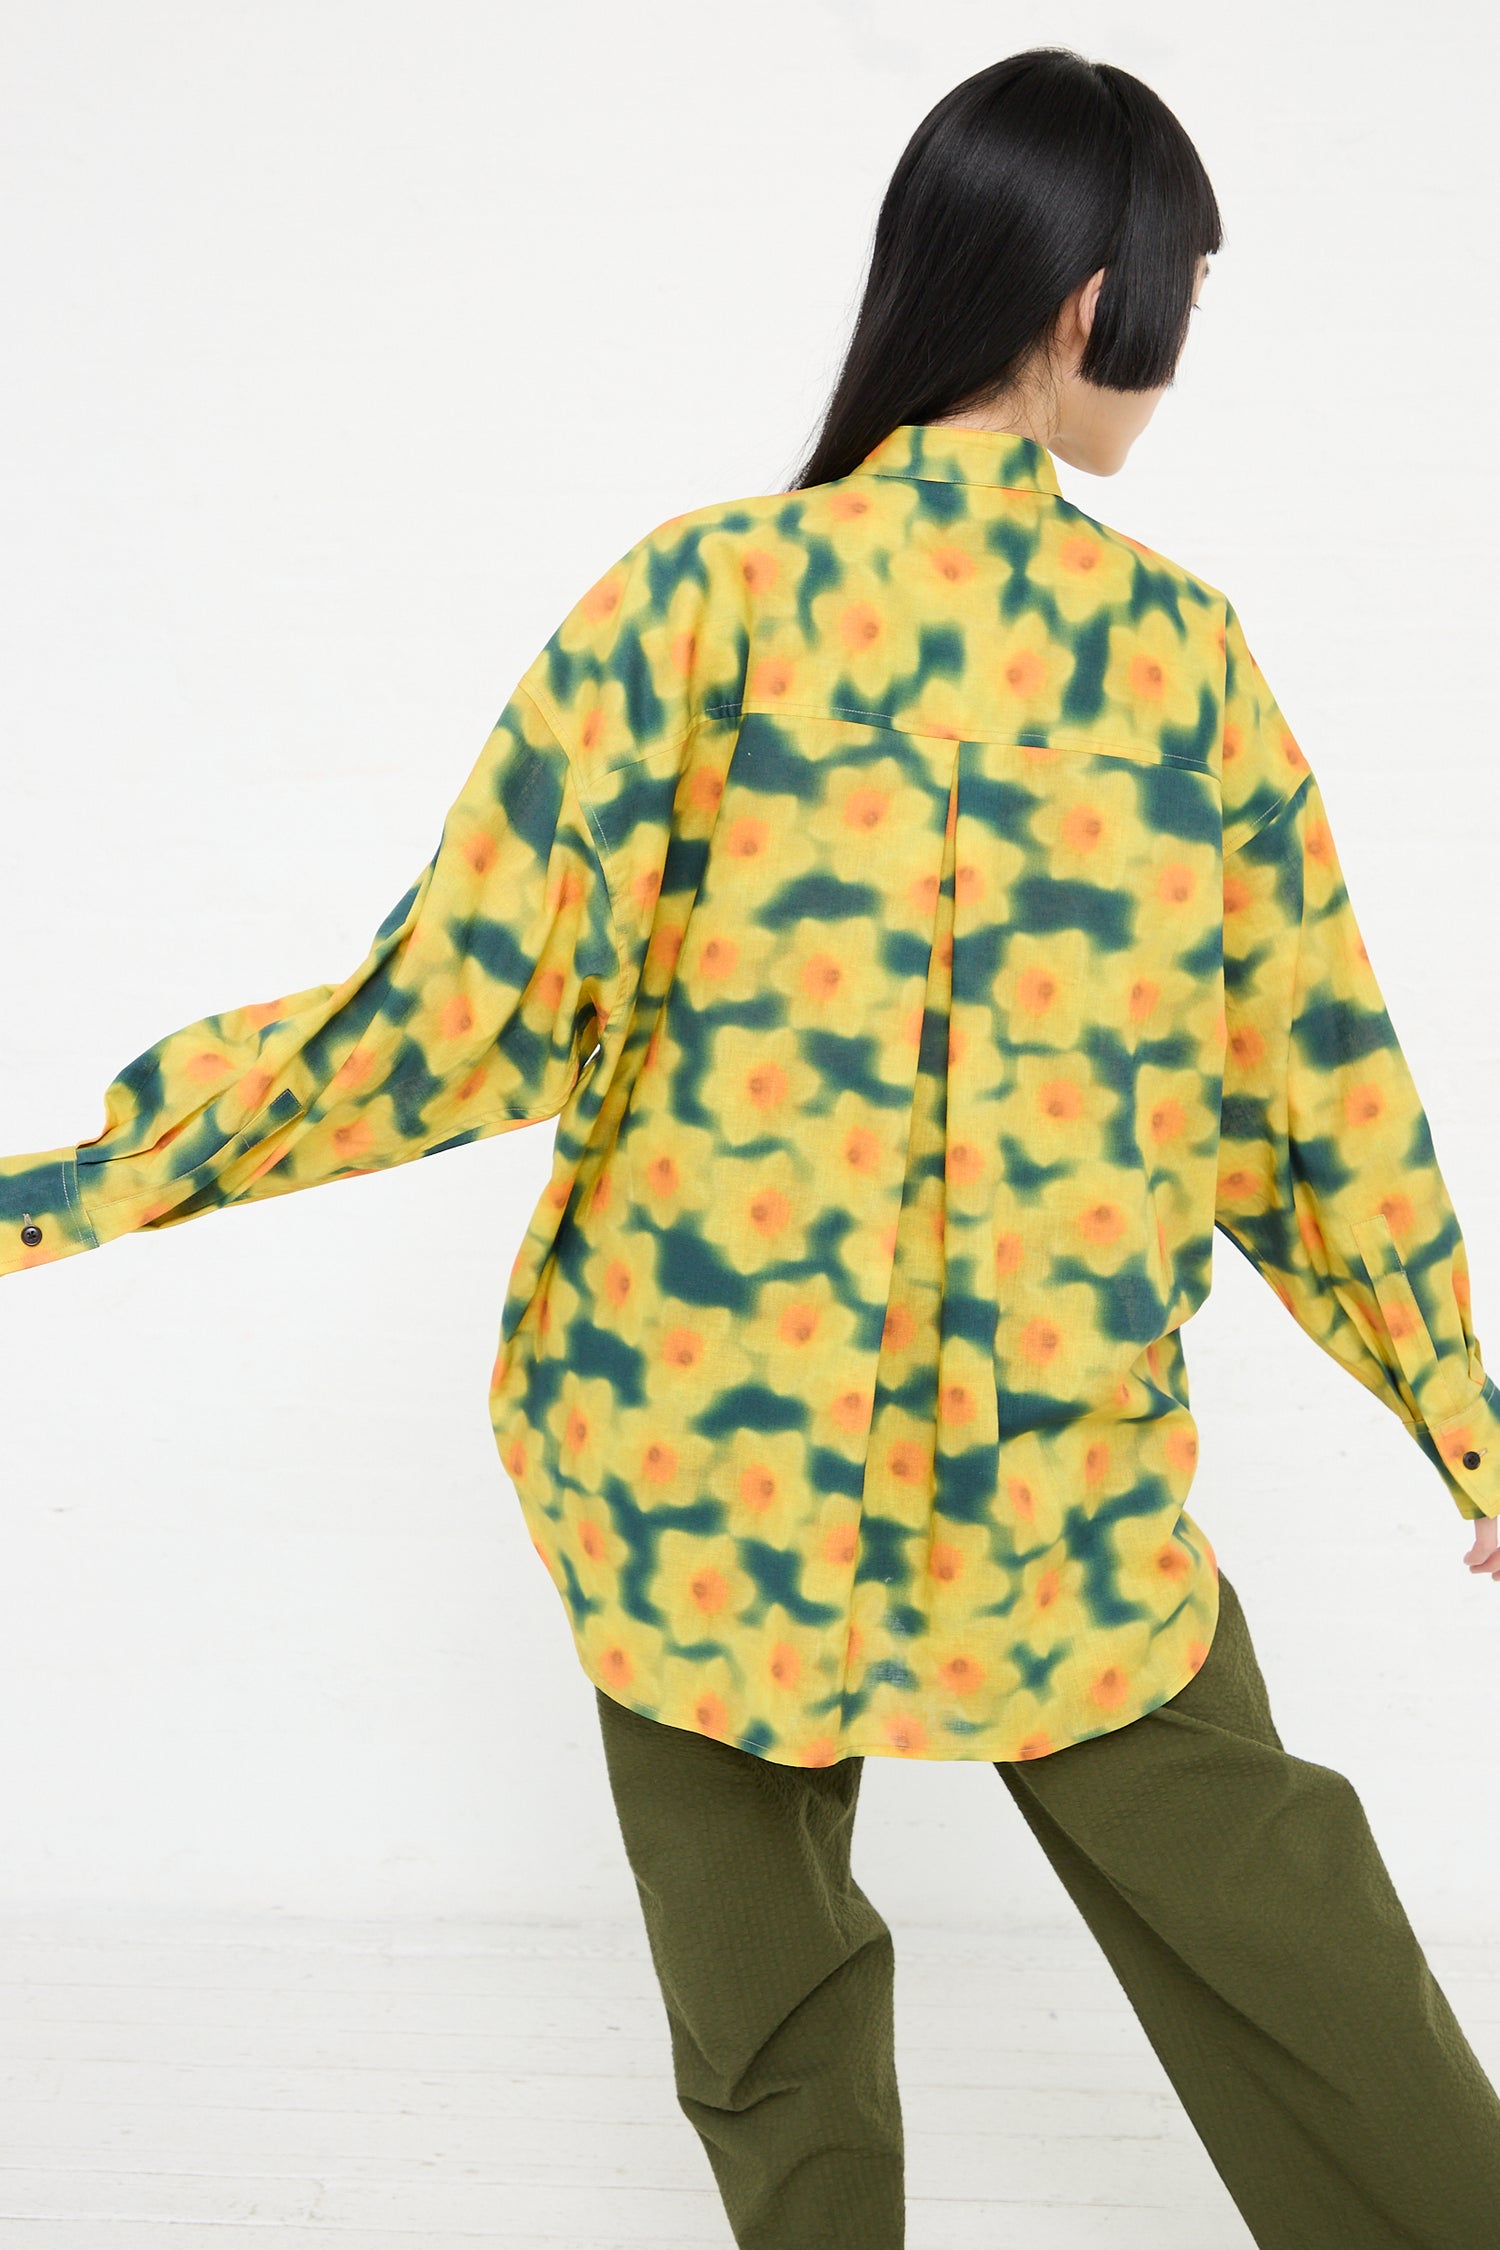 Woman wearing a KasMaria Cotton Linen Large Front Pocket Shirt in Daffodil Print in yellow and green, seen from behind.